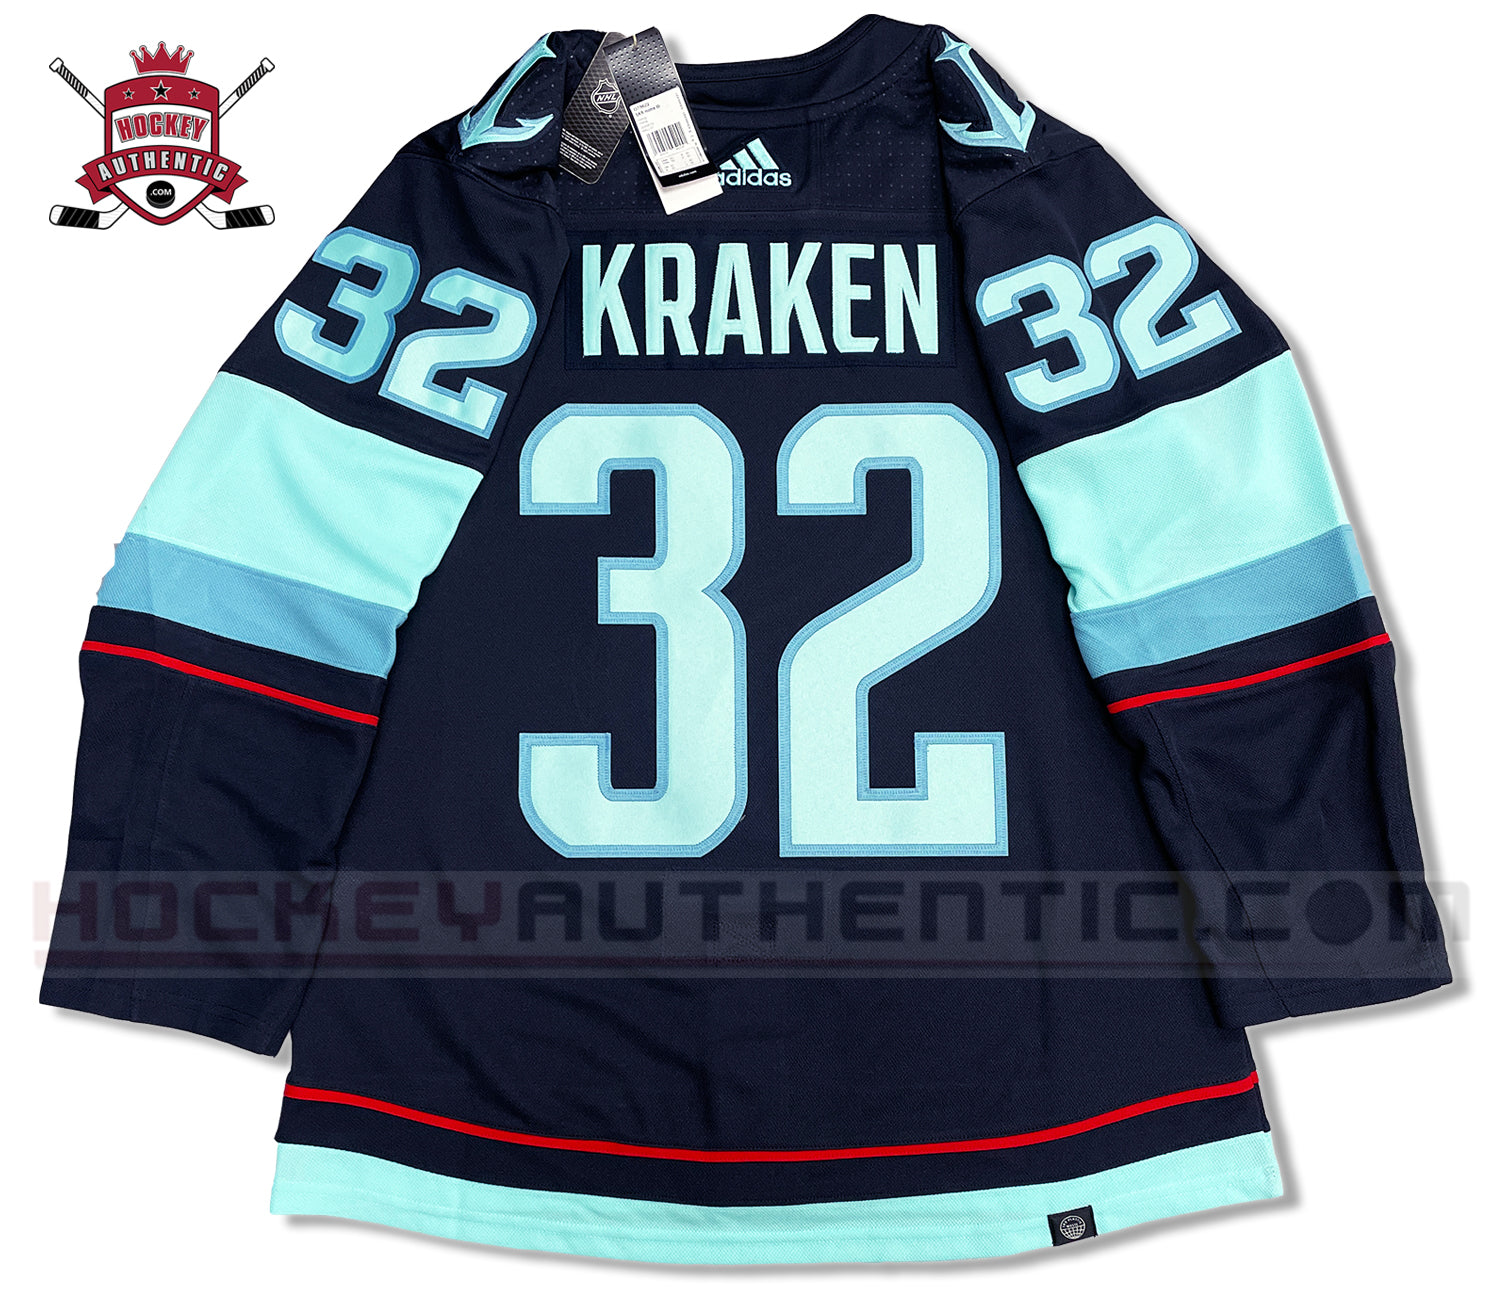 Seattle Kraken authentic Adidas home jersey new Size 52(Large)